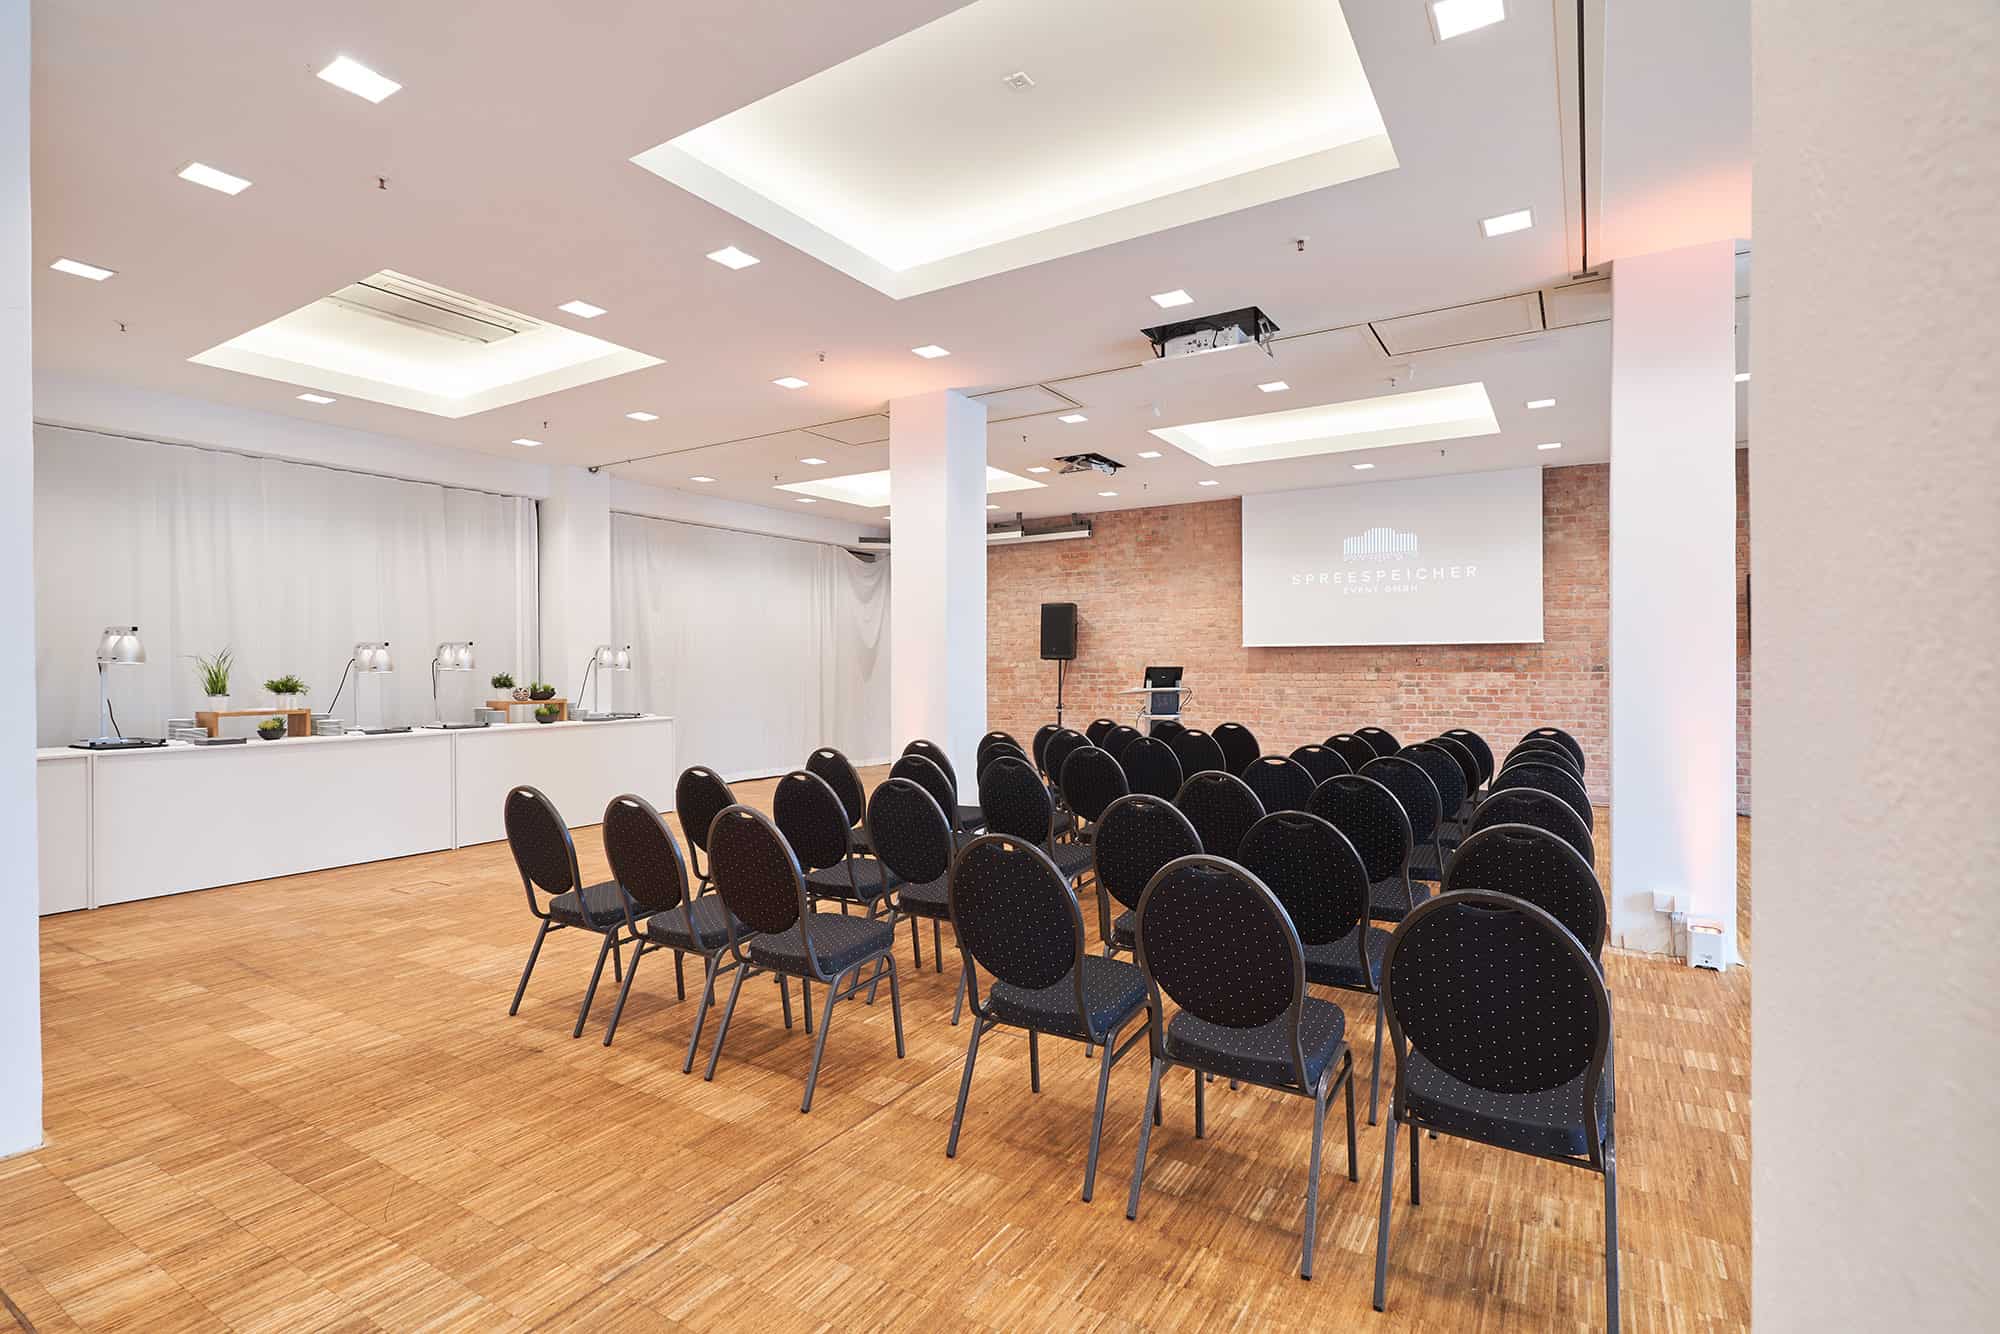 <div><strong>Room Ultimo 180 m²</strong><br> up to 150 people<br> <br><span class='text-sm'> ✓ HD projector with HDMI connection<br> ✓ Access to the Spree Terrace<br> ✓ Conference chairs<br><br></span><strong>1.600€ room rental</strong><br><span class='text-sm'>plus additional costs<br></span></div>